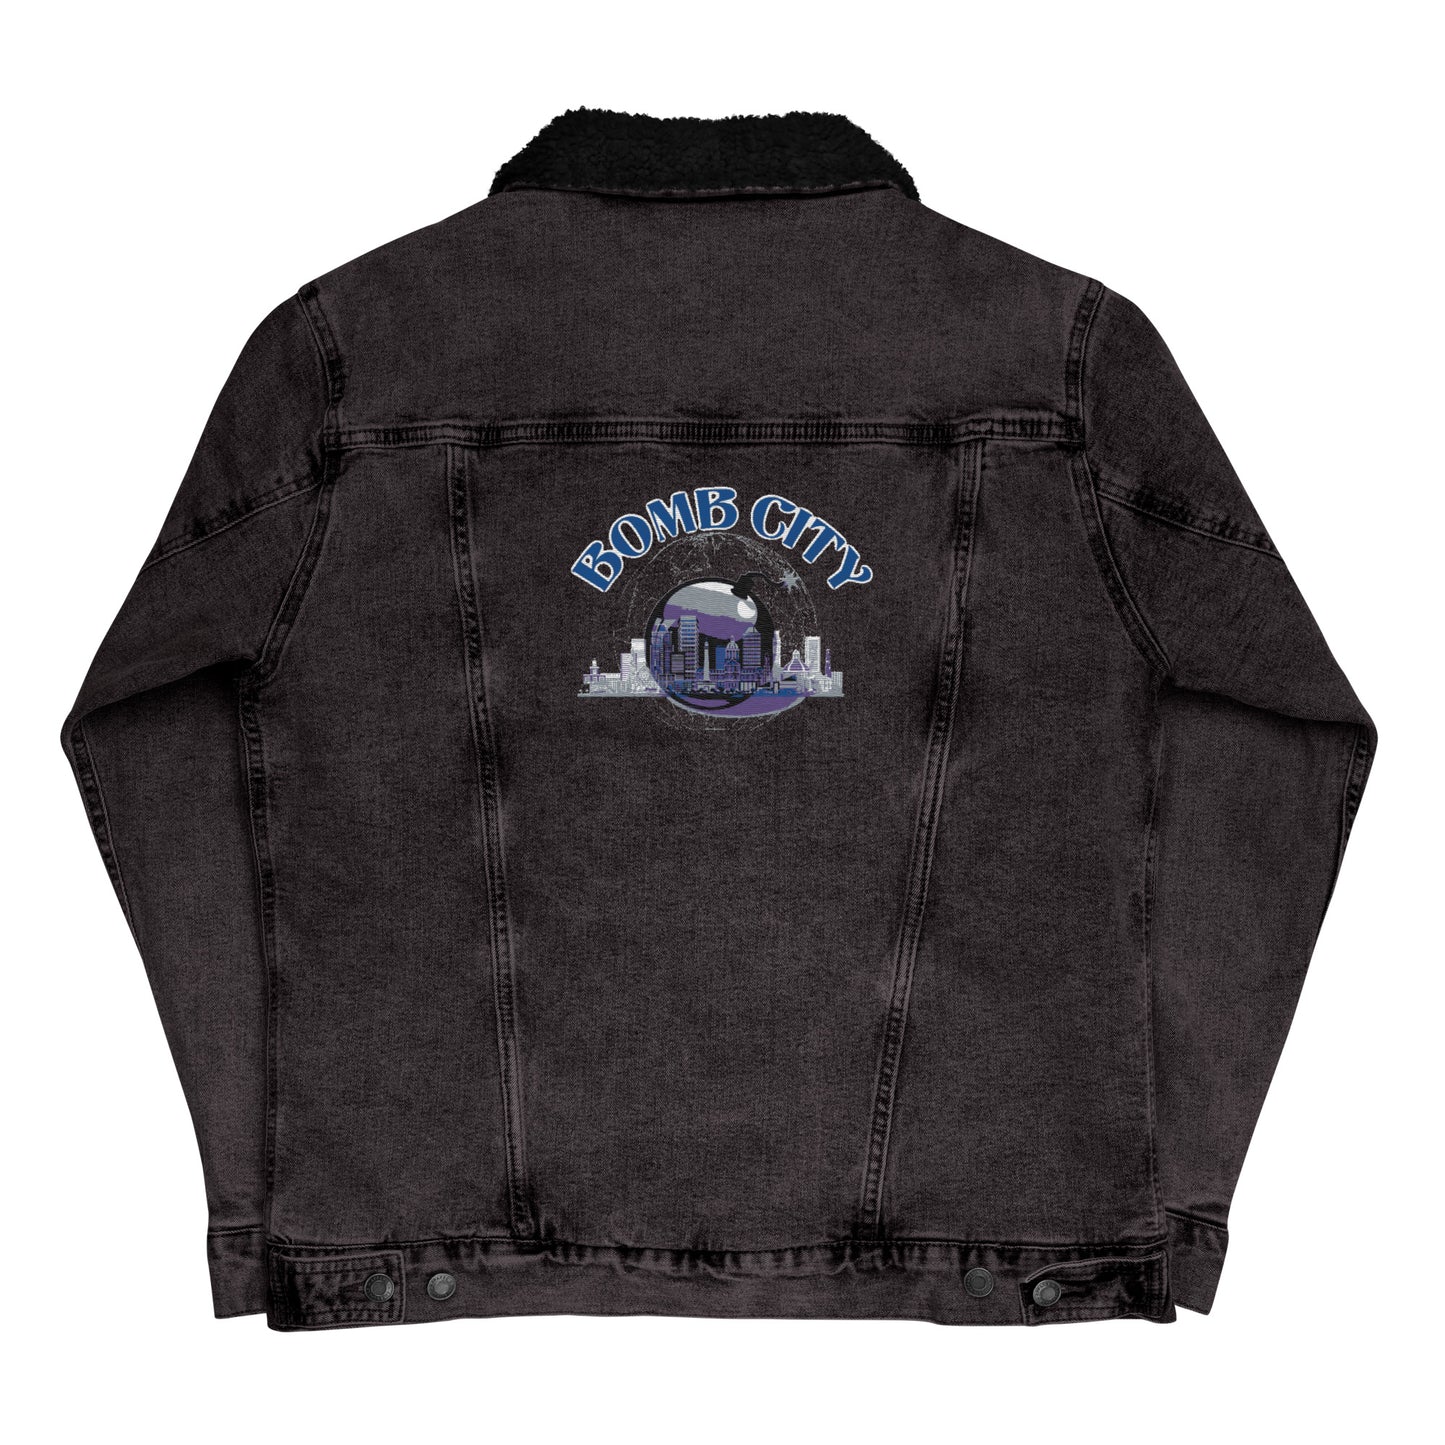 Bomb City Embroidered logo denim sherpa jacket. (Available in Blue Jean)